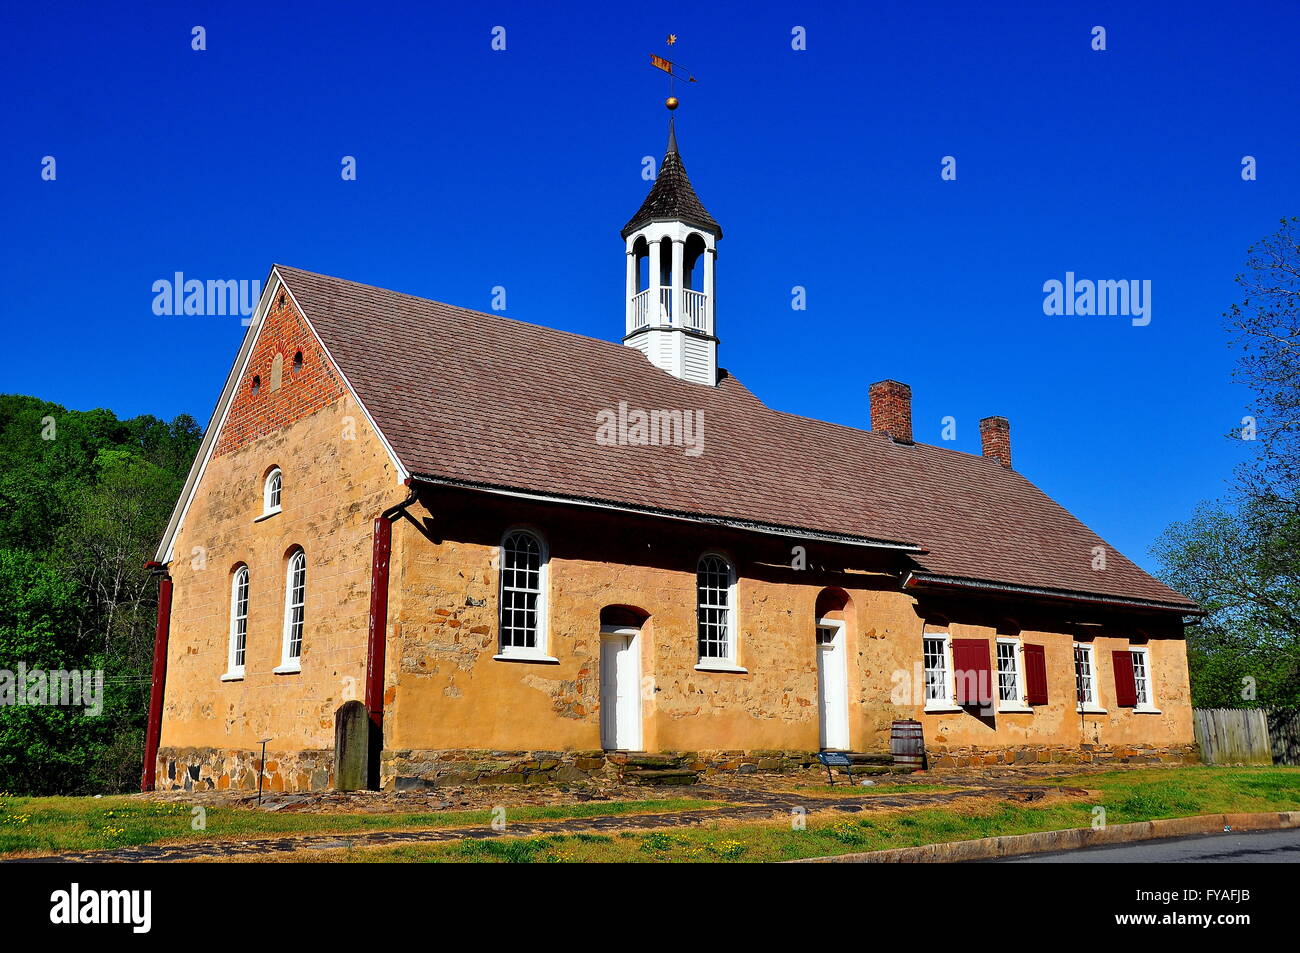 Bethabara, North Carolina: 1788 Gemeinhaus Moravian Church with attached minister's house at Bethabara historic settlement * Stock Photo